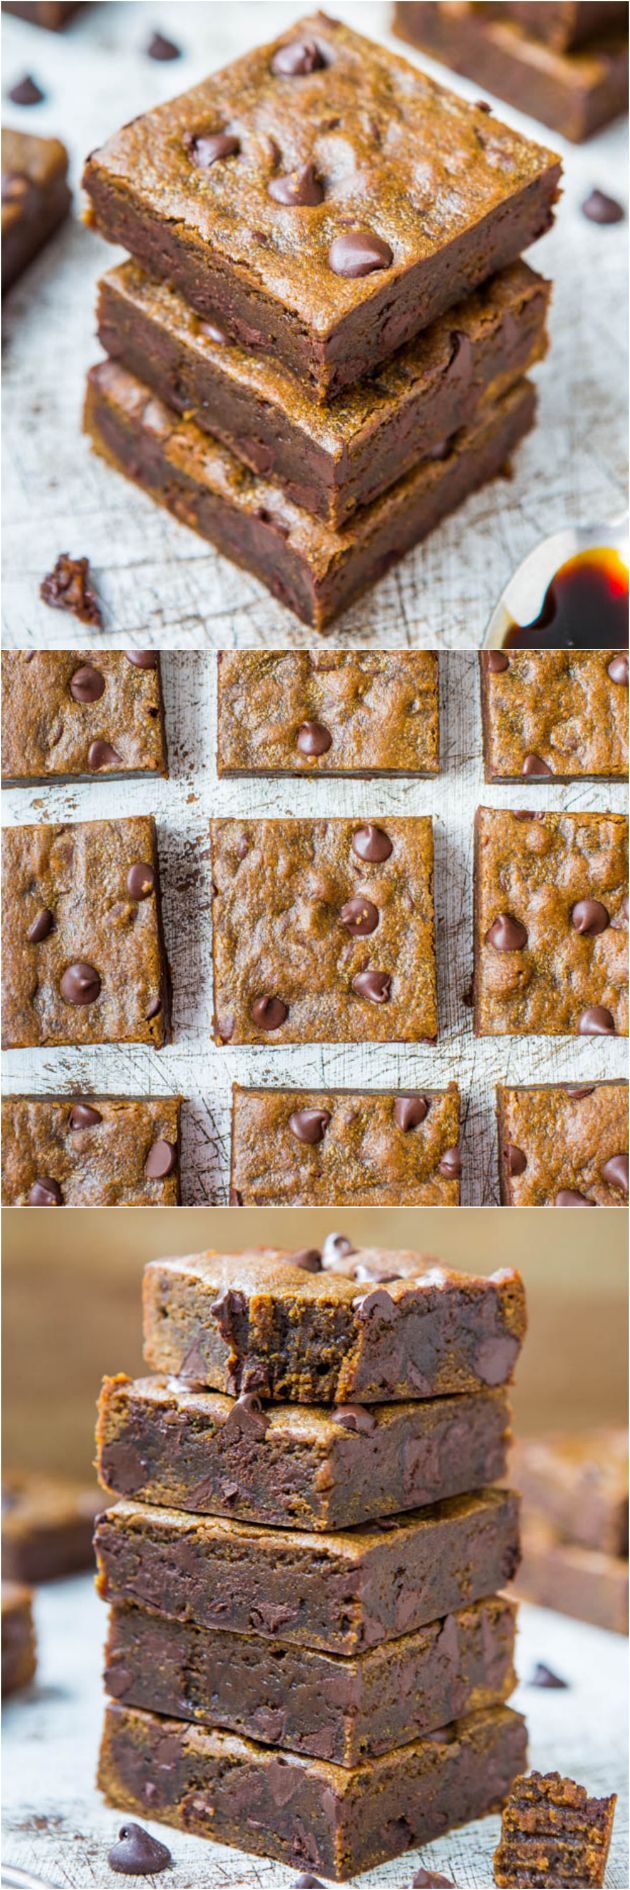 Soft and Chewy Gingerbread Molasses Chocolate Chip Bars – Rich, chocolaty & like eating a piece of molasses fudge!